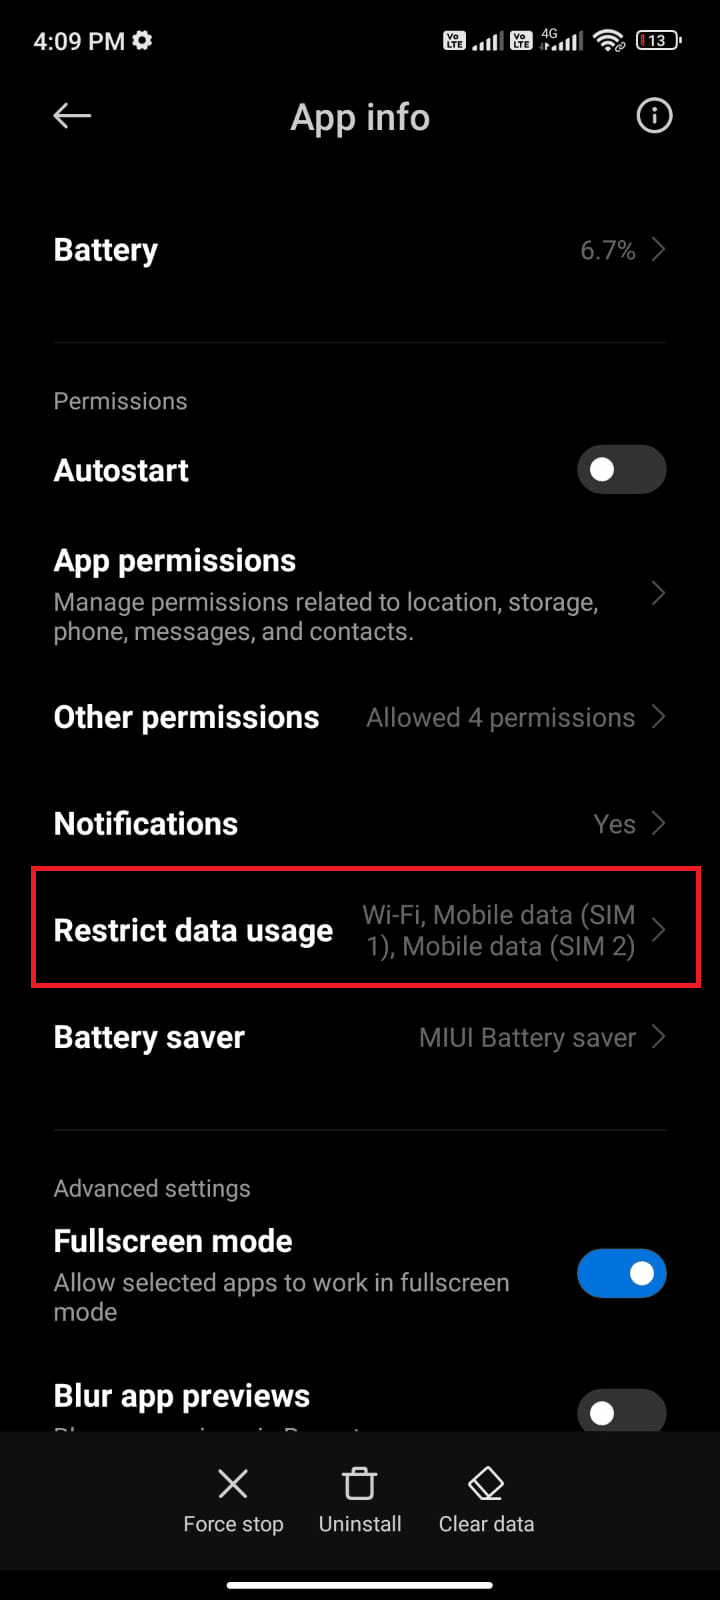 Then, tap on Restricted data usage